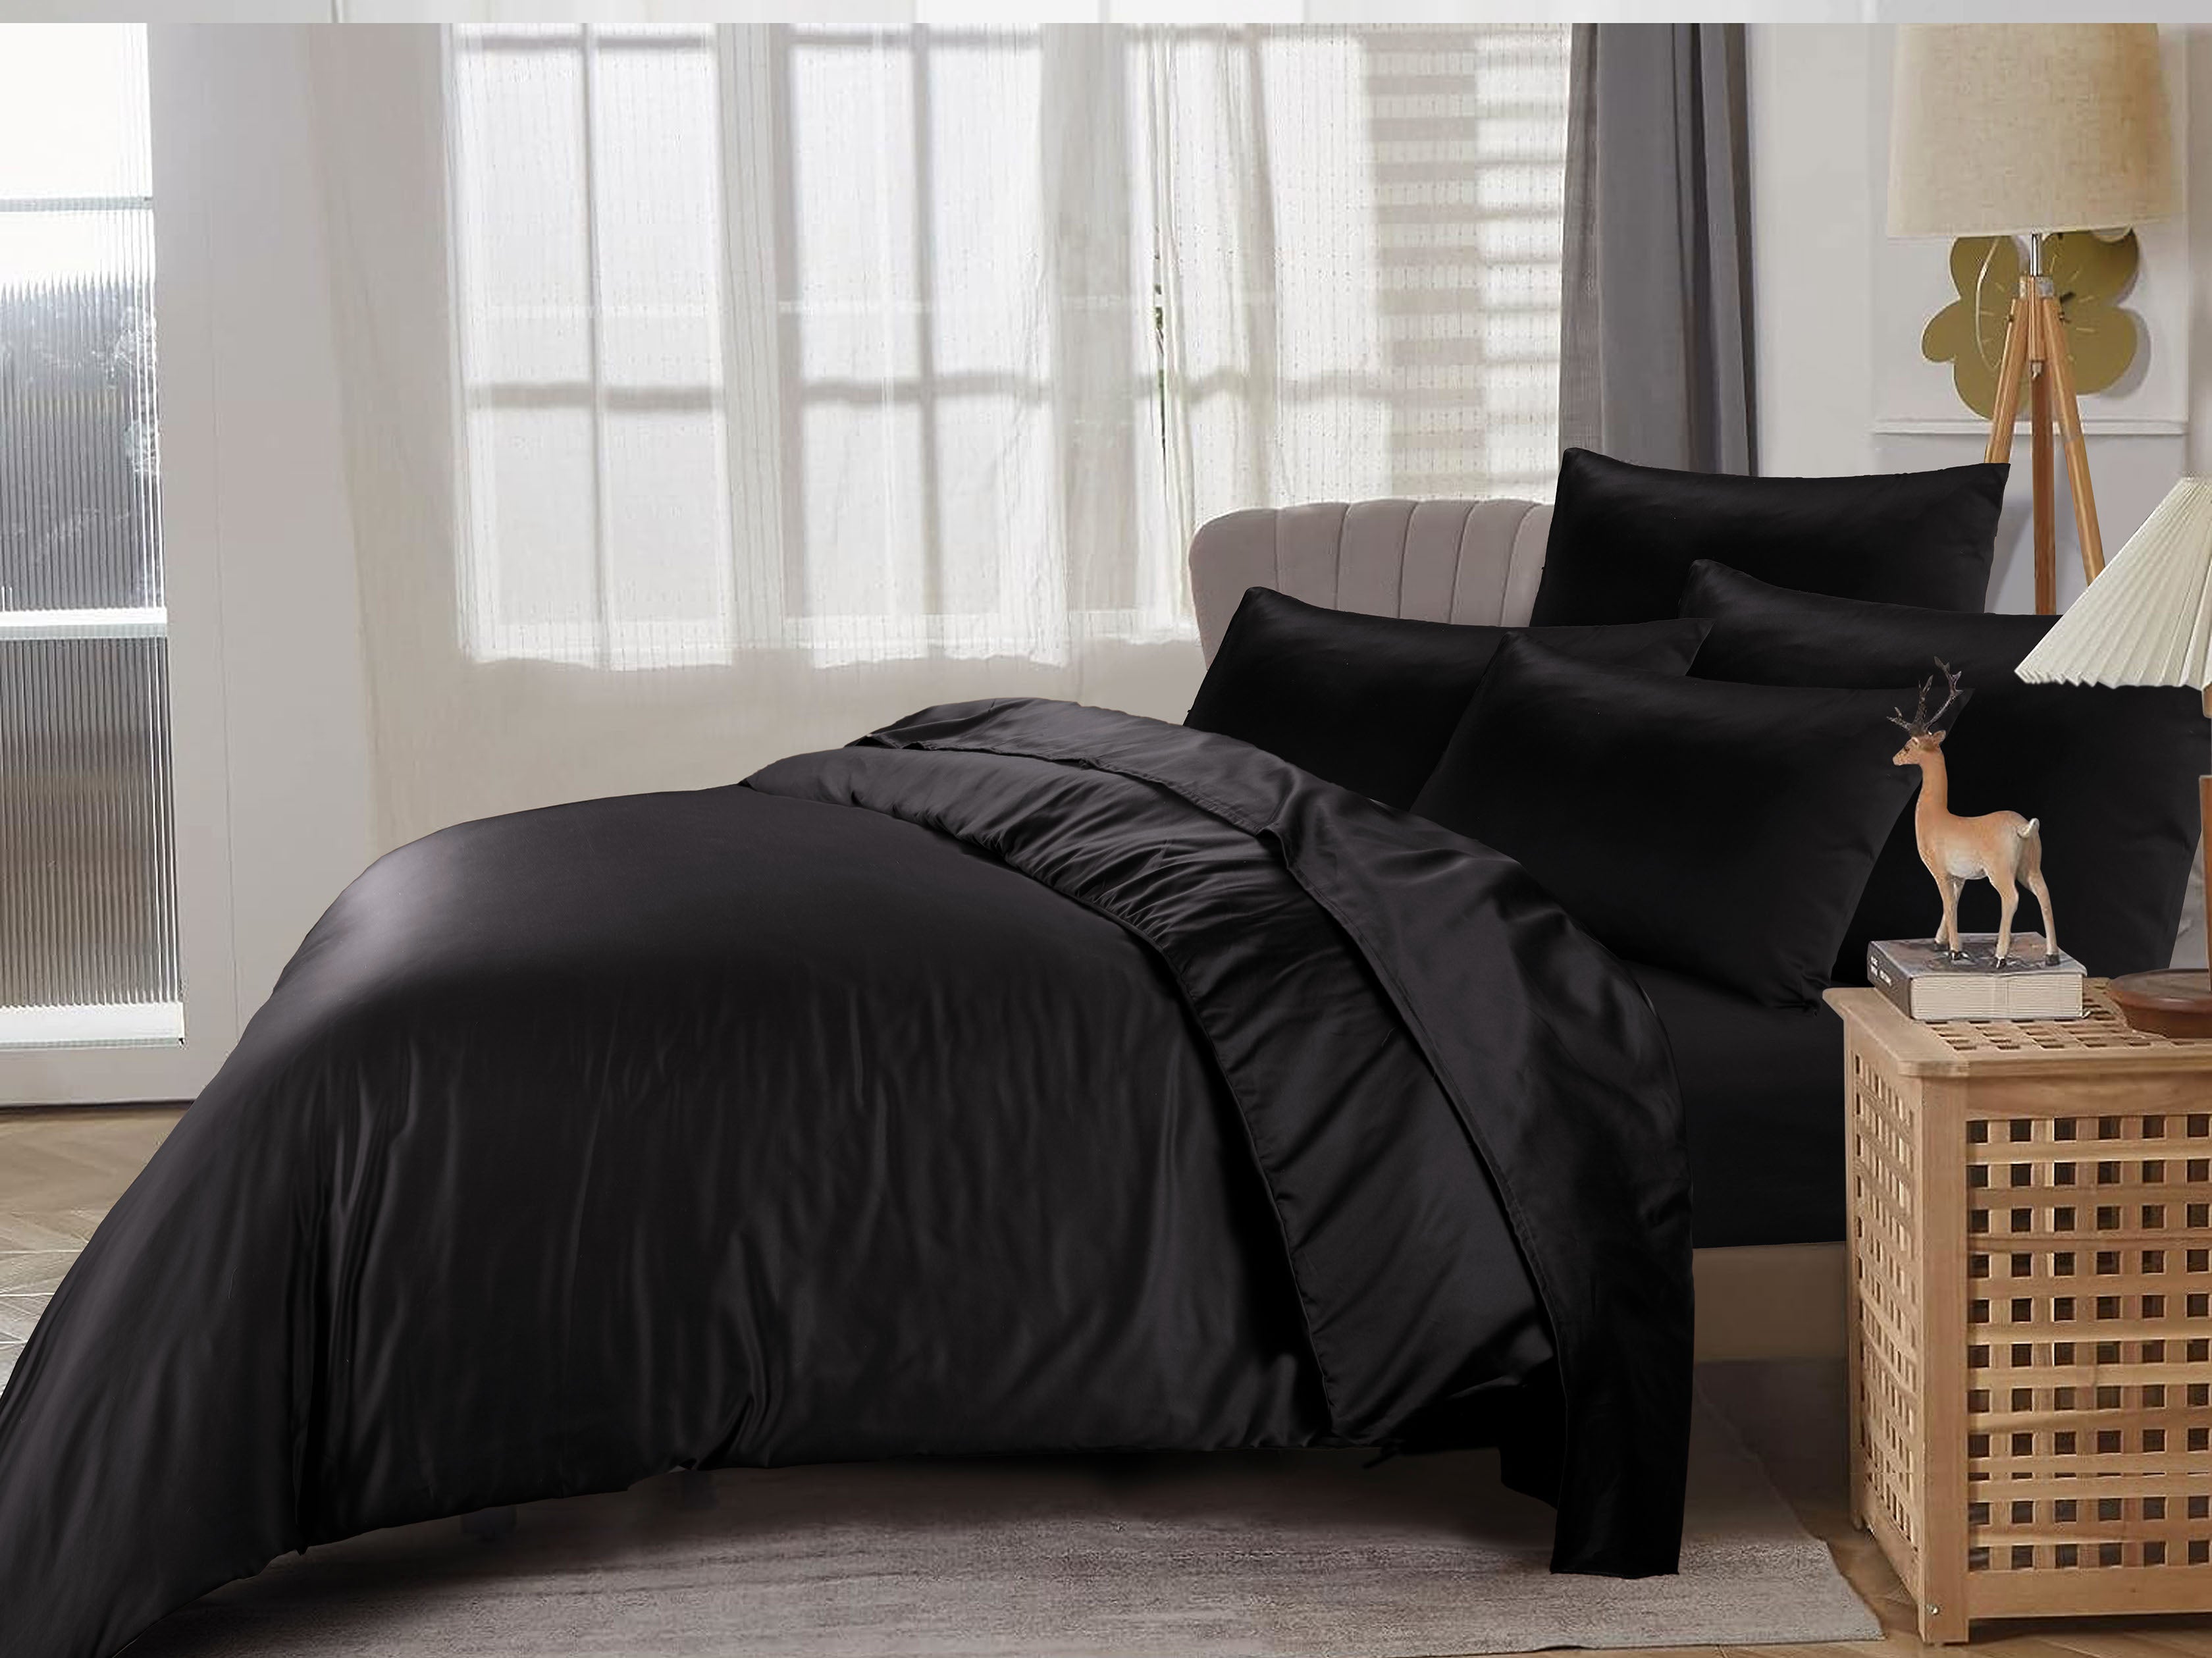 BLACK SOLID - BED IN A BAG - DAHOME TEXTILES